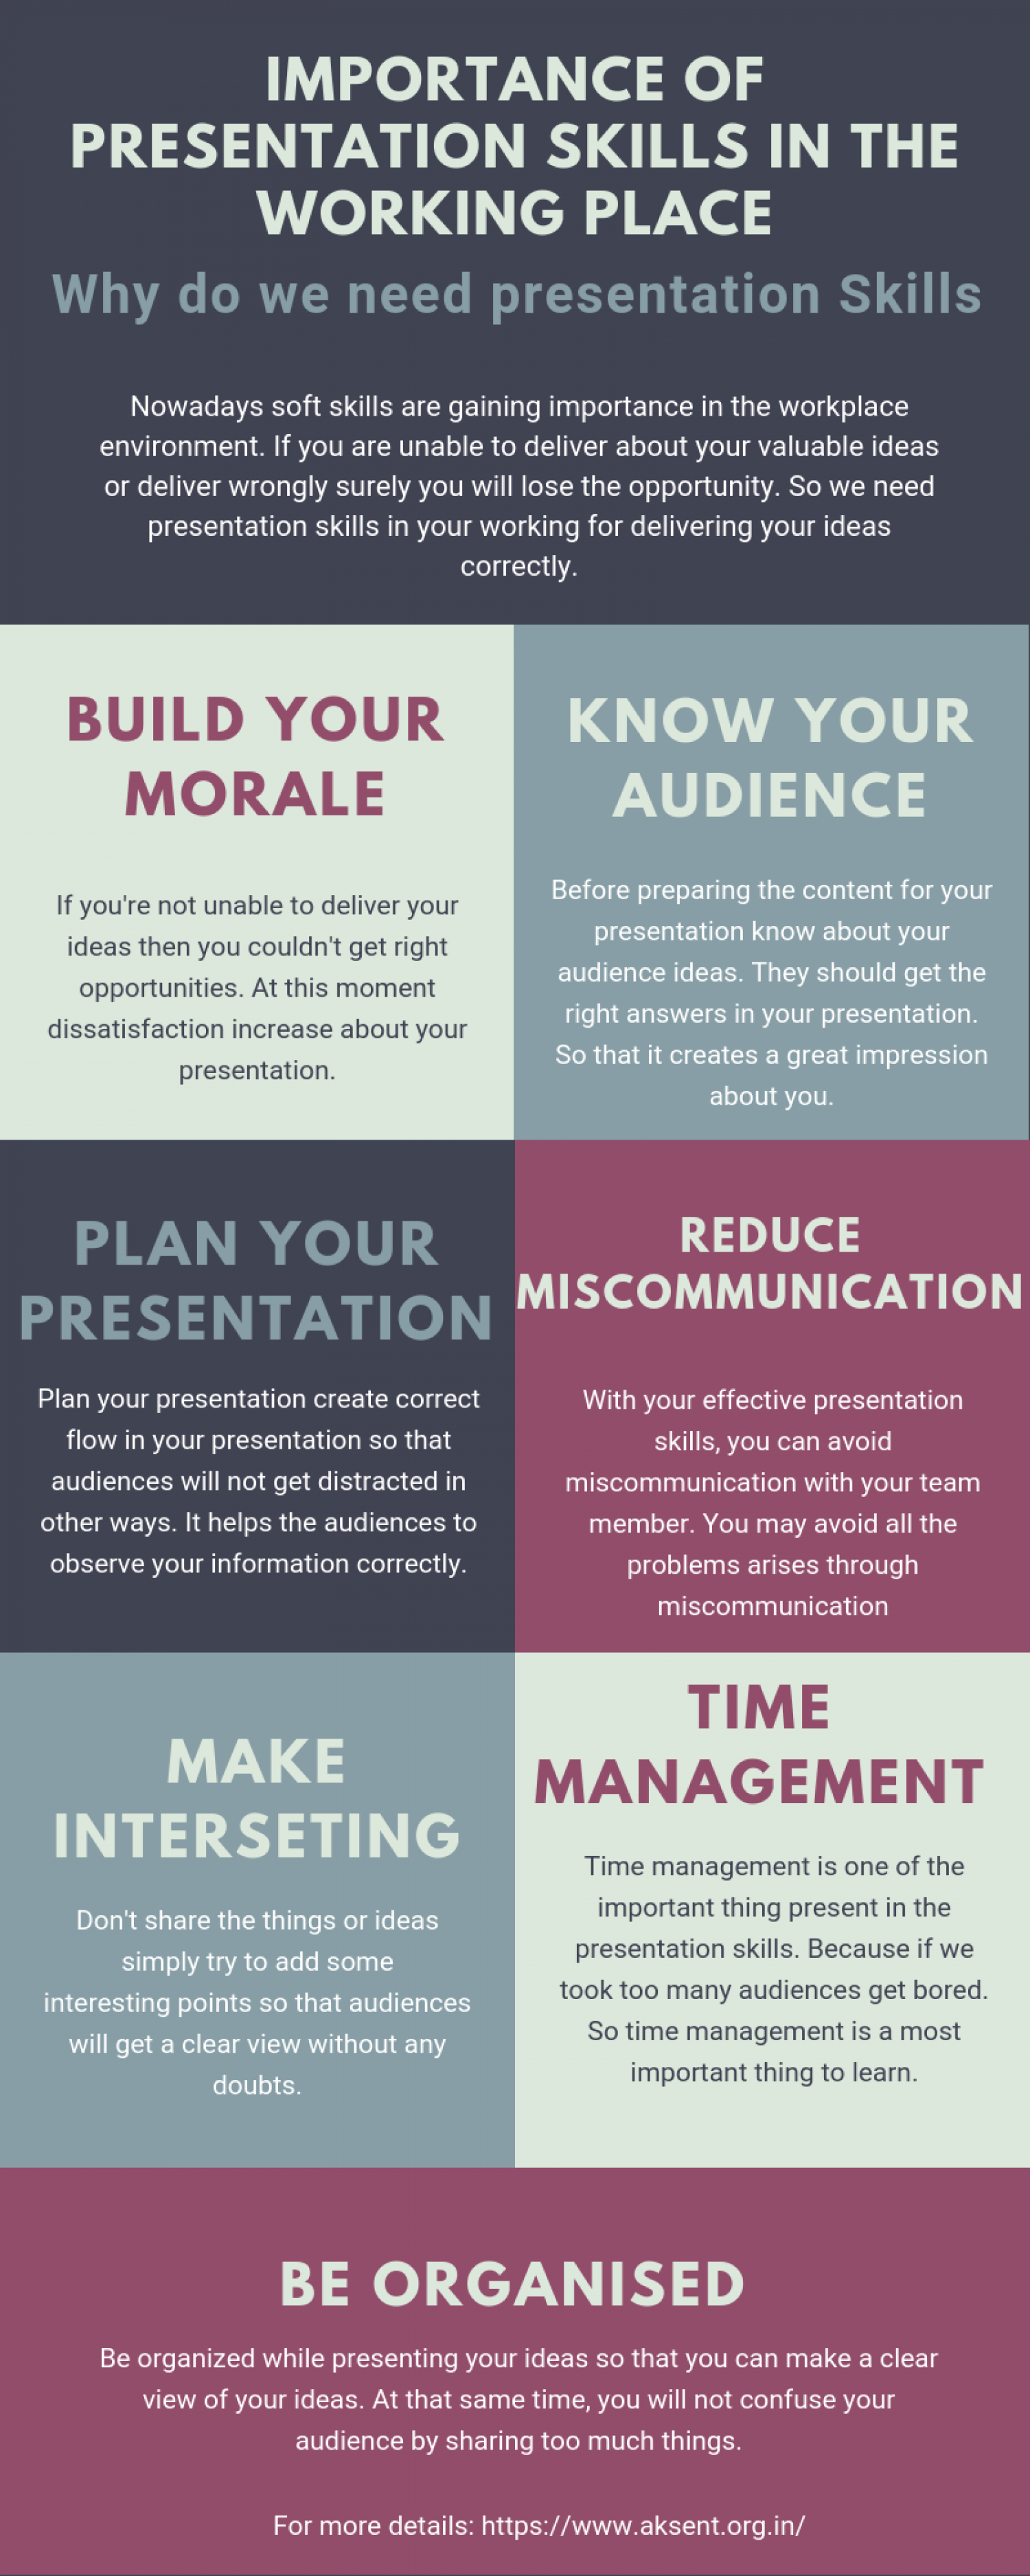 why are presentation skills important for entrepreneurs to develop